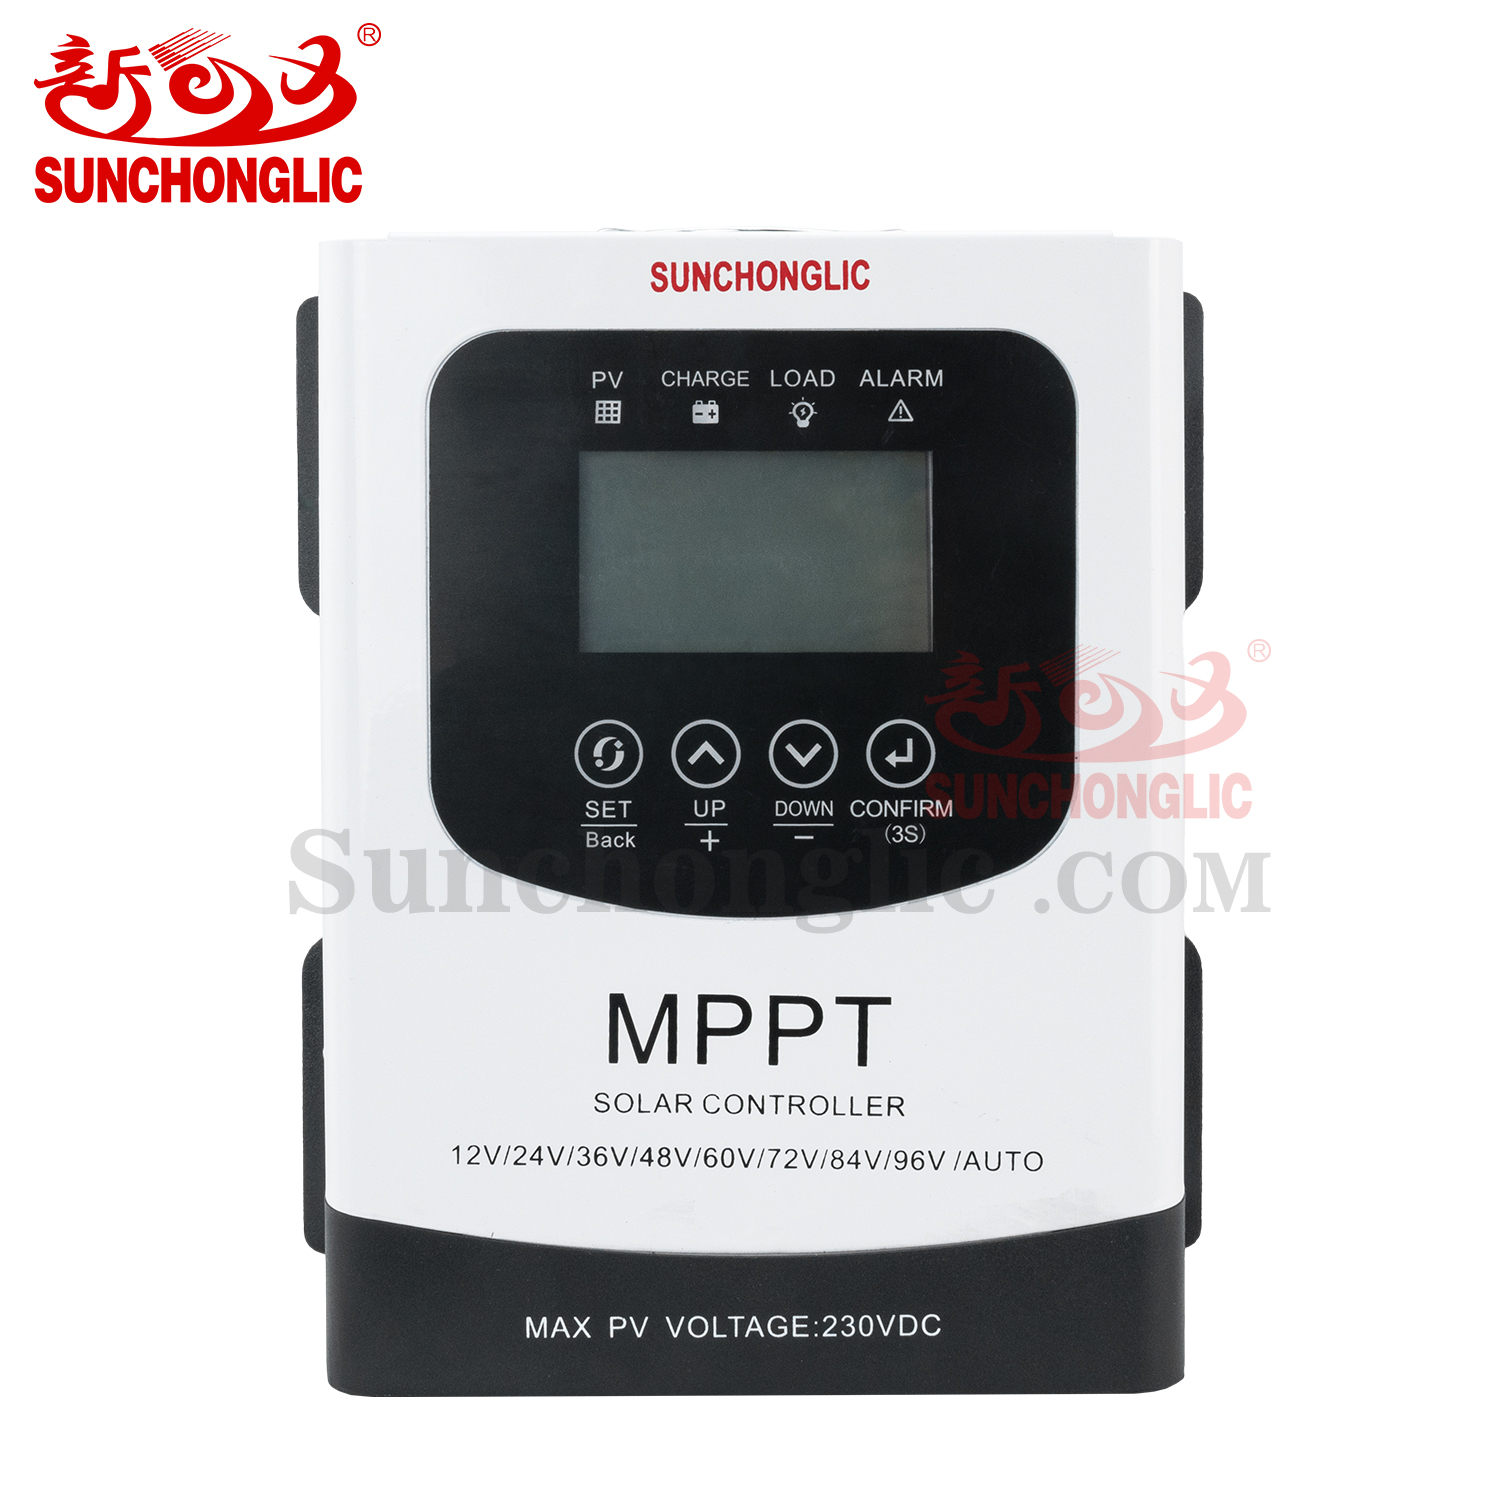 MPPT Solar Charge Controller - MPPT 30A